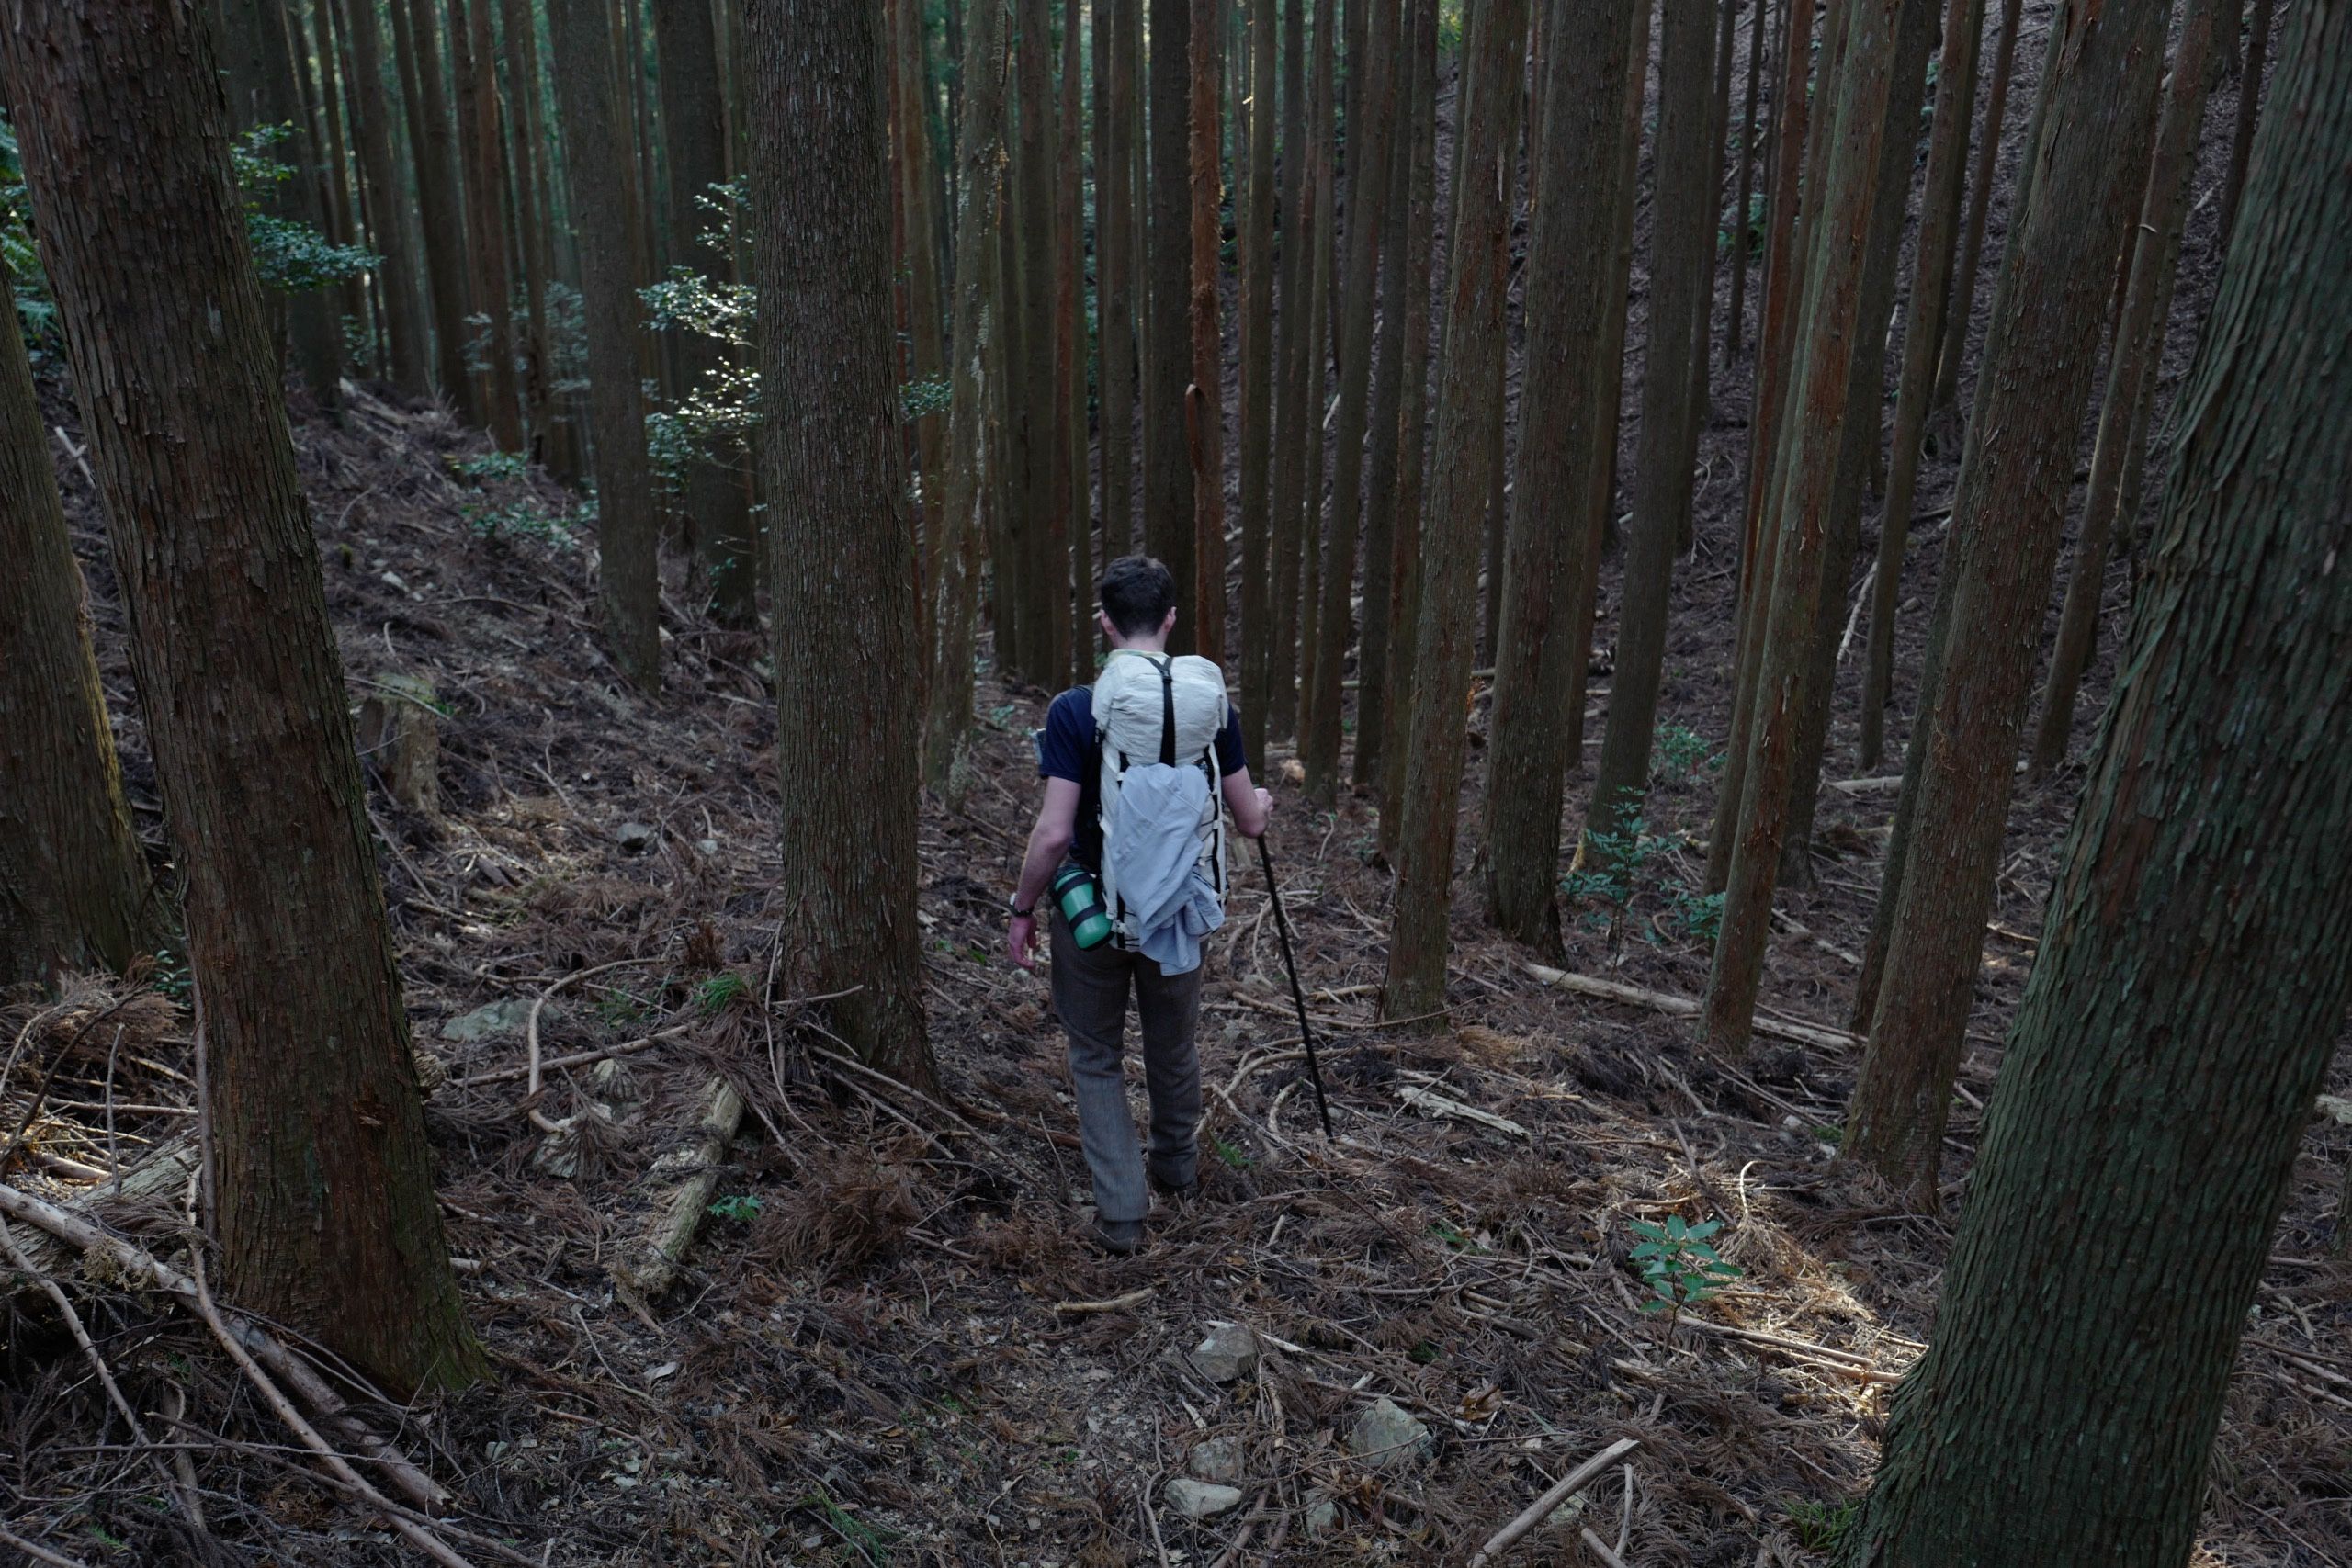 Another man, the author, walks in a dense cedar forest.